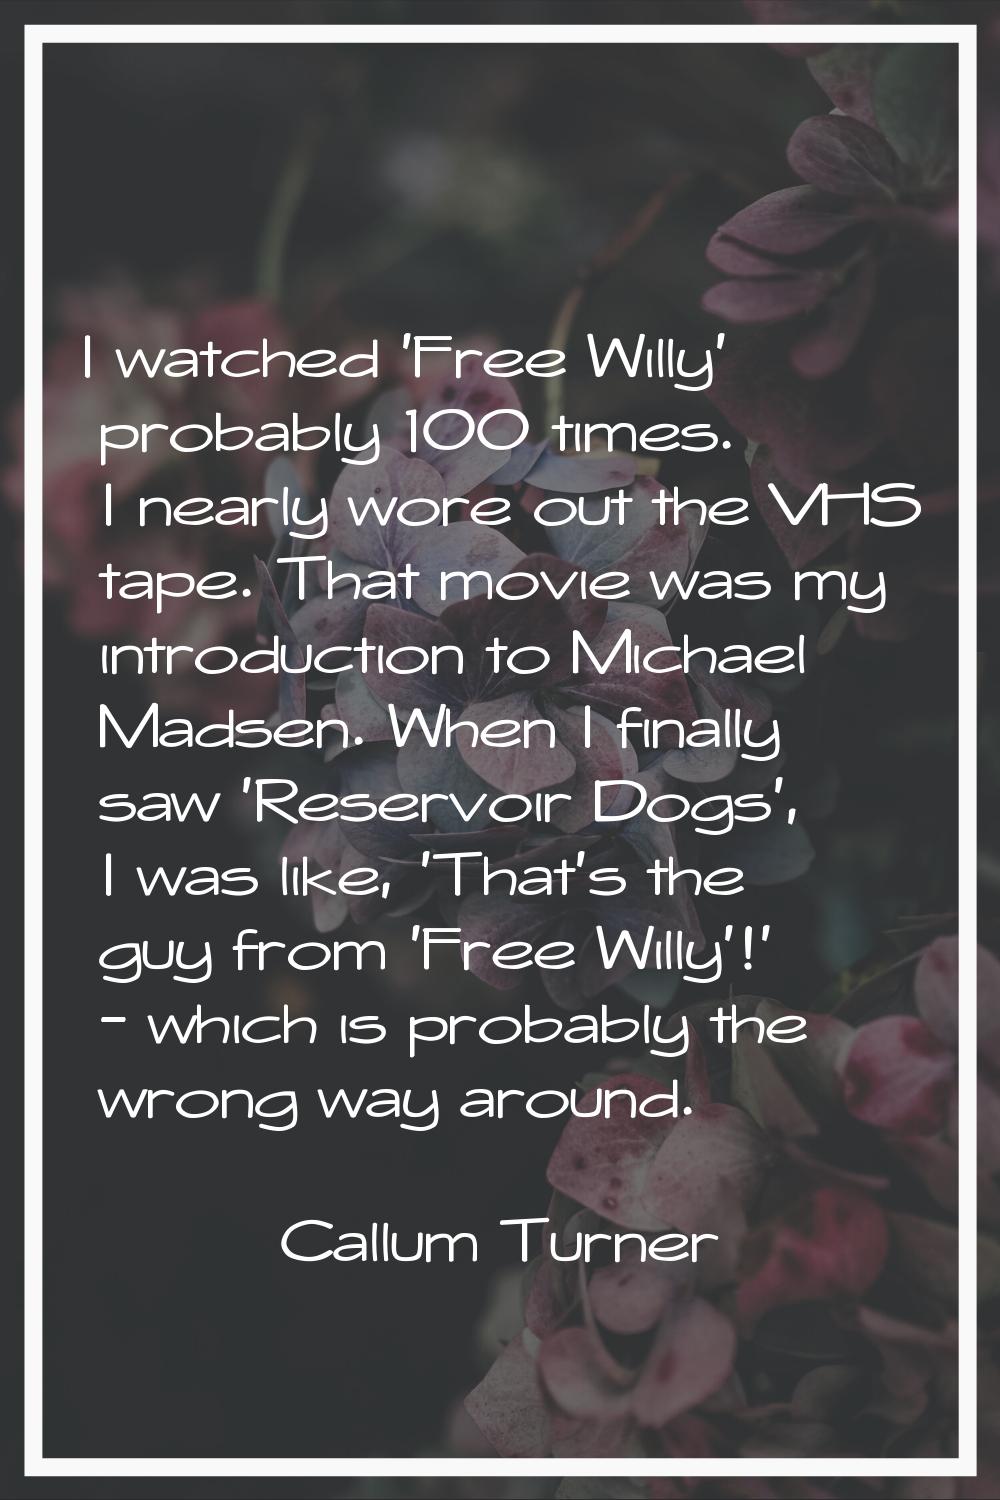 I watched 'Free Willy' probably 100 times. I nearly wore out the VHS tape. That movie was my introd